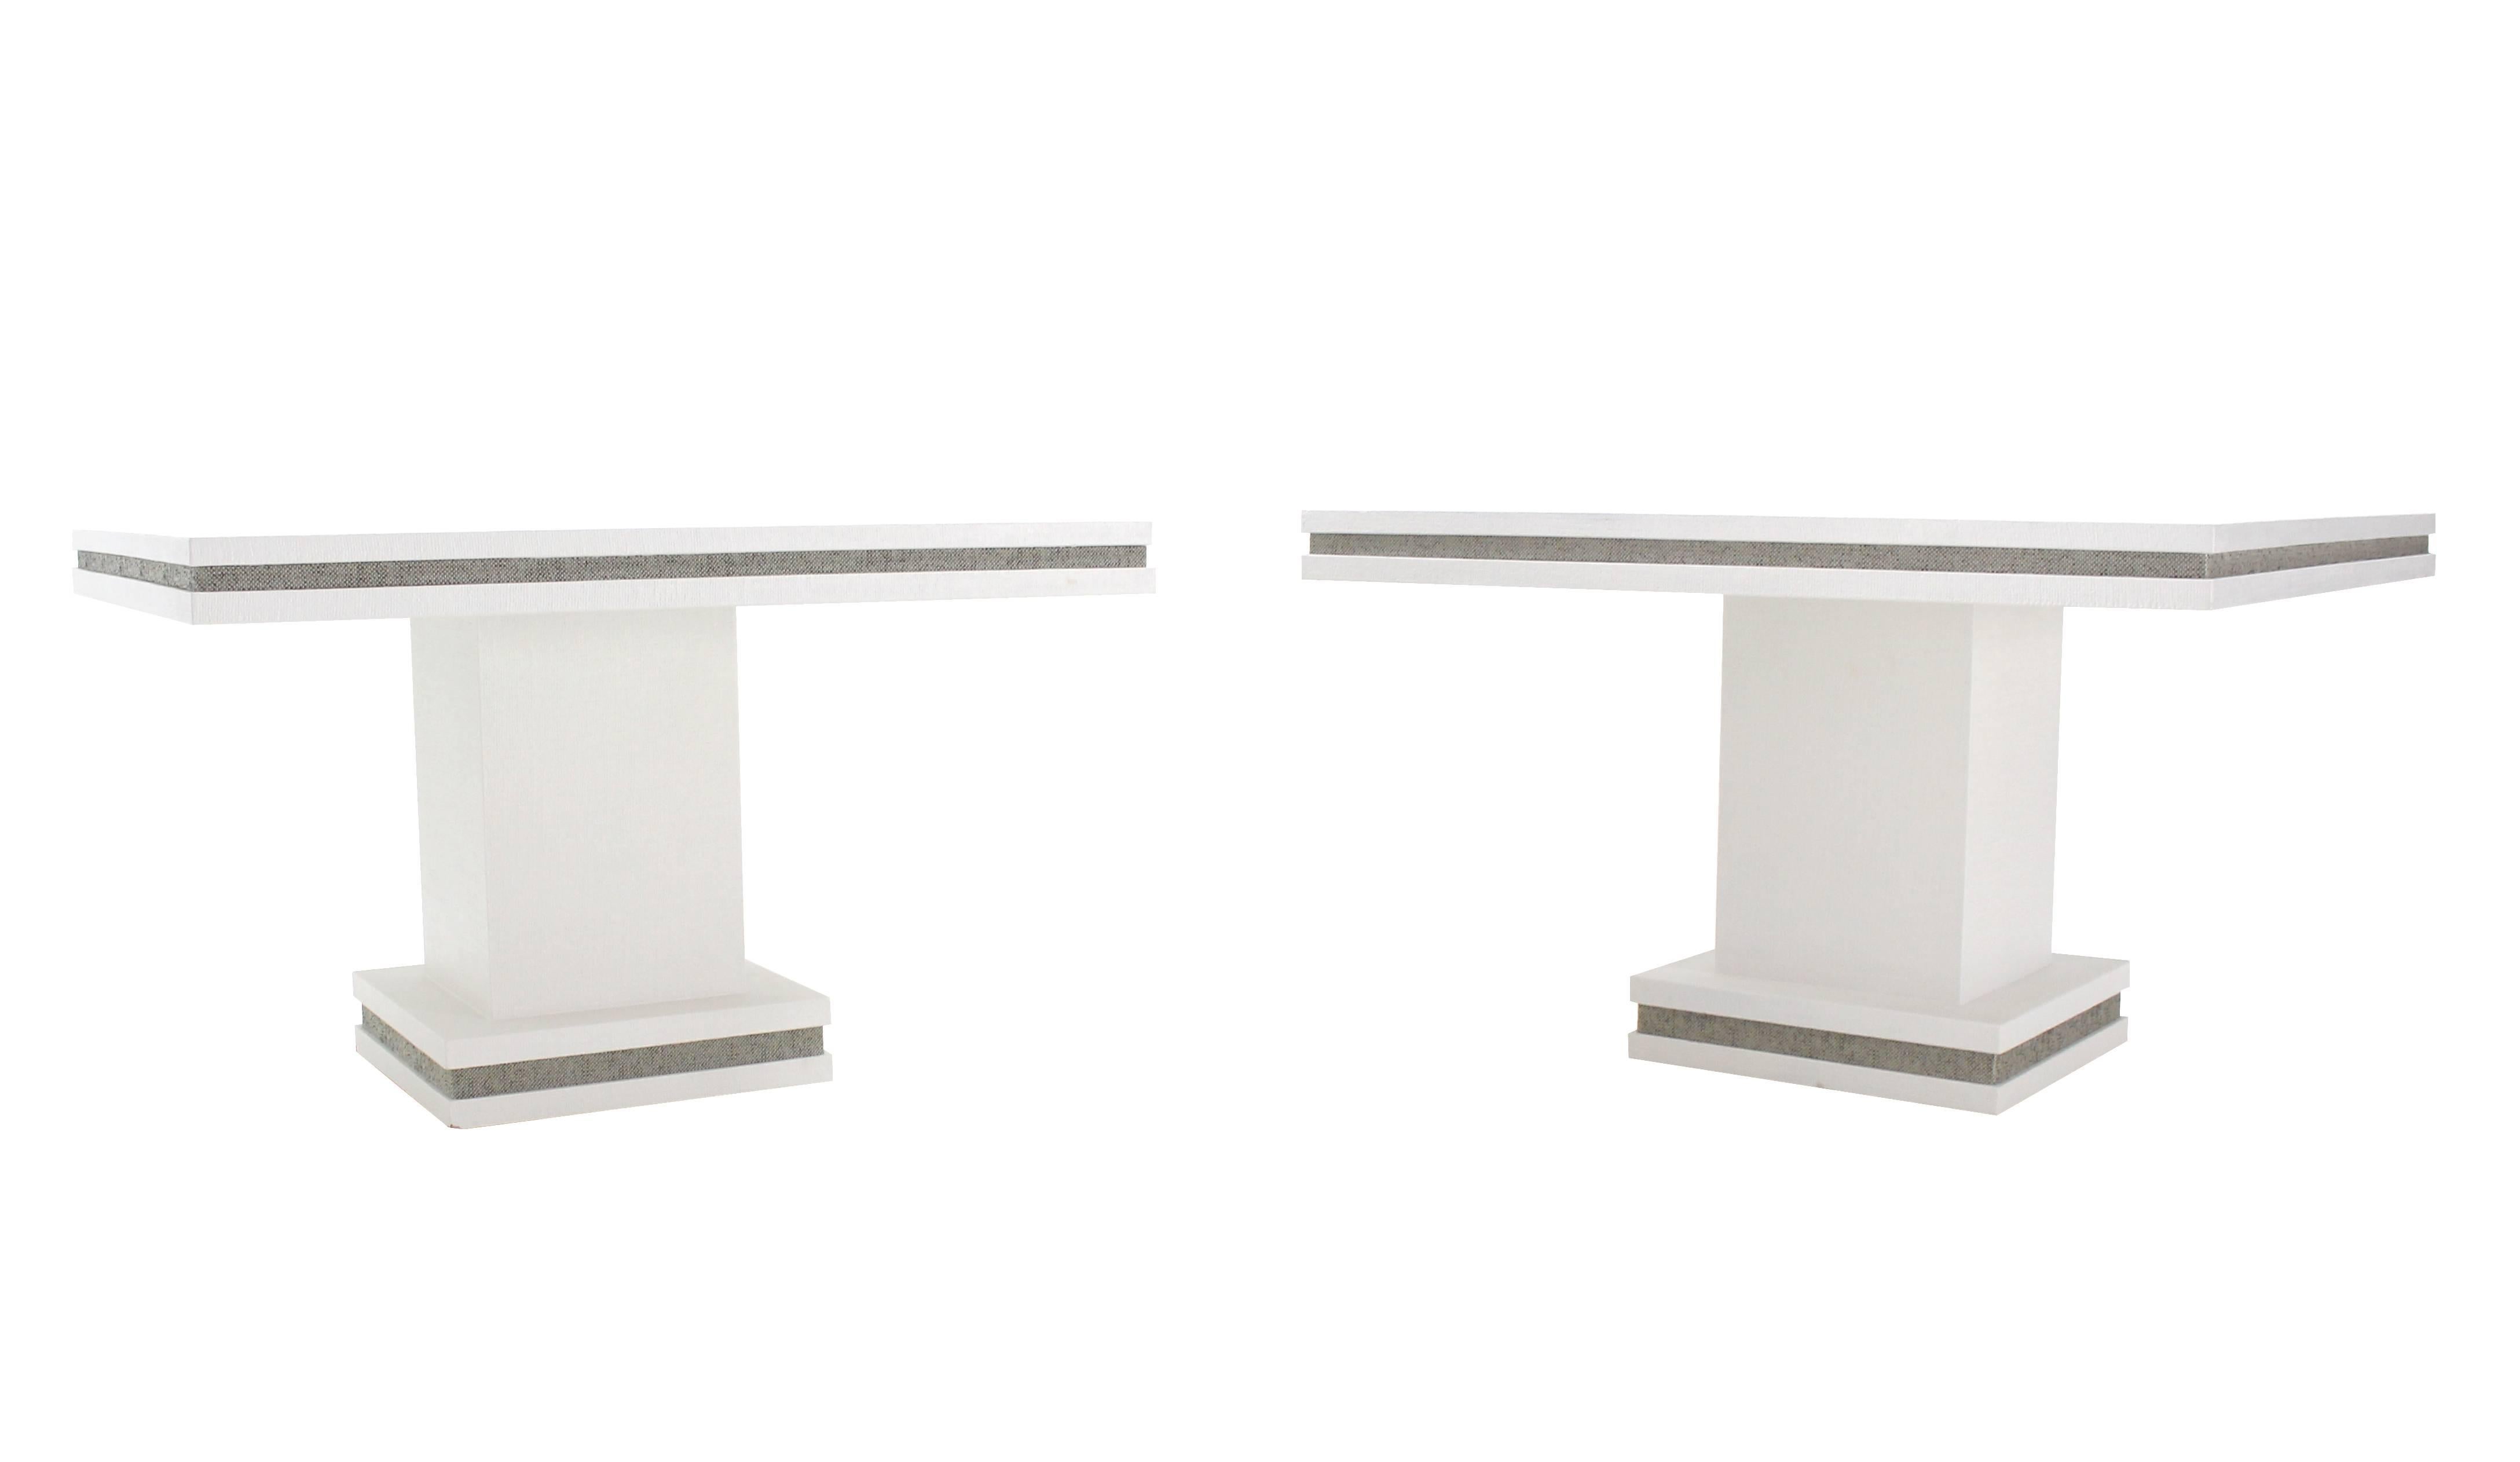 Very nice pair of white lacquer cloth game tables.